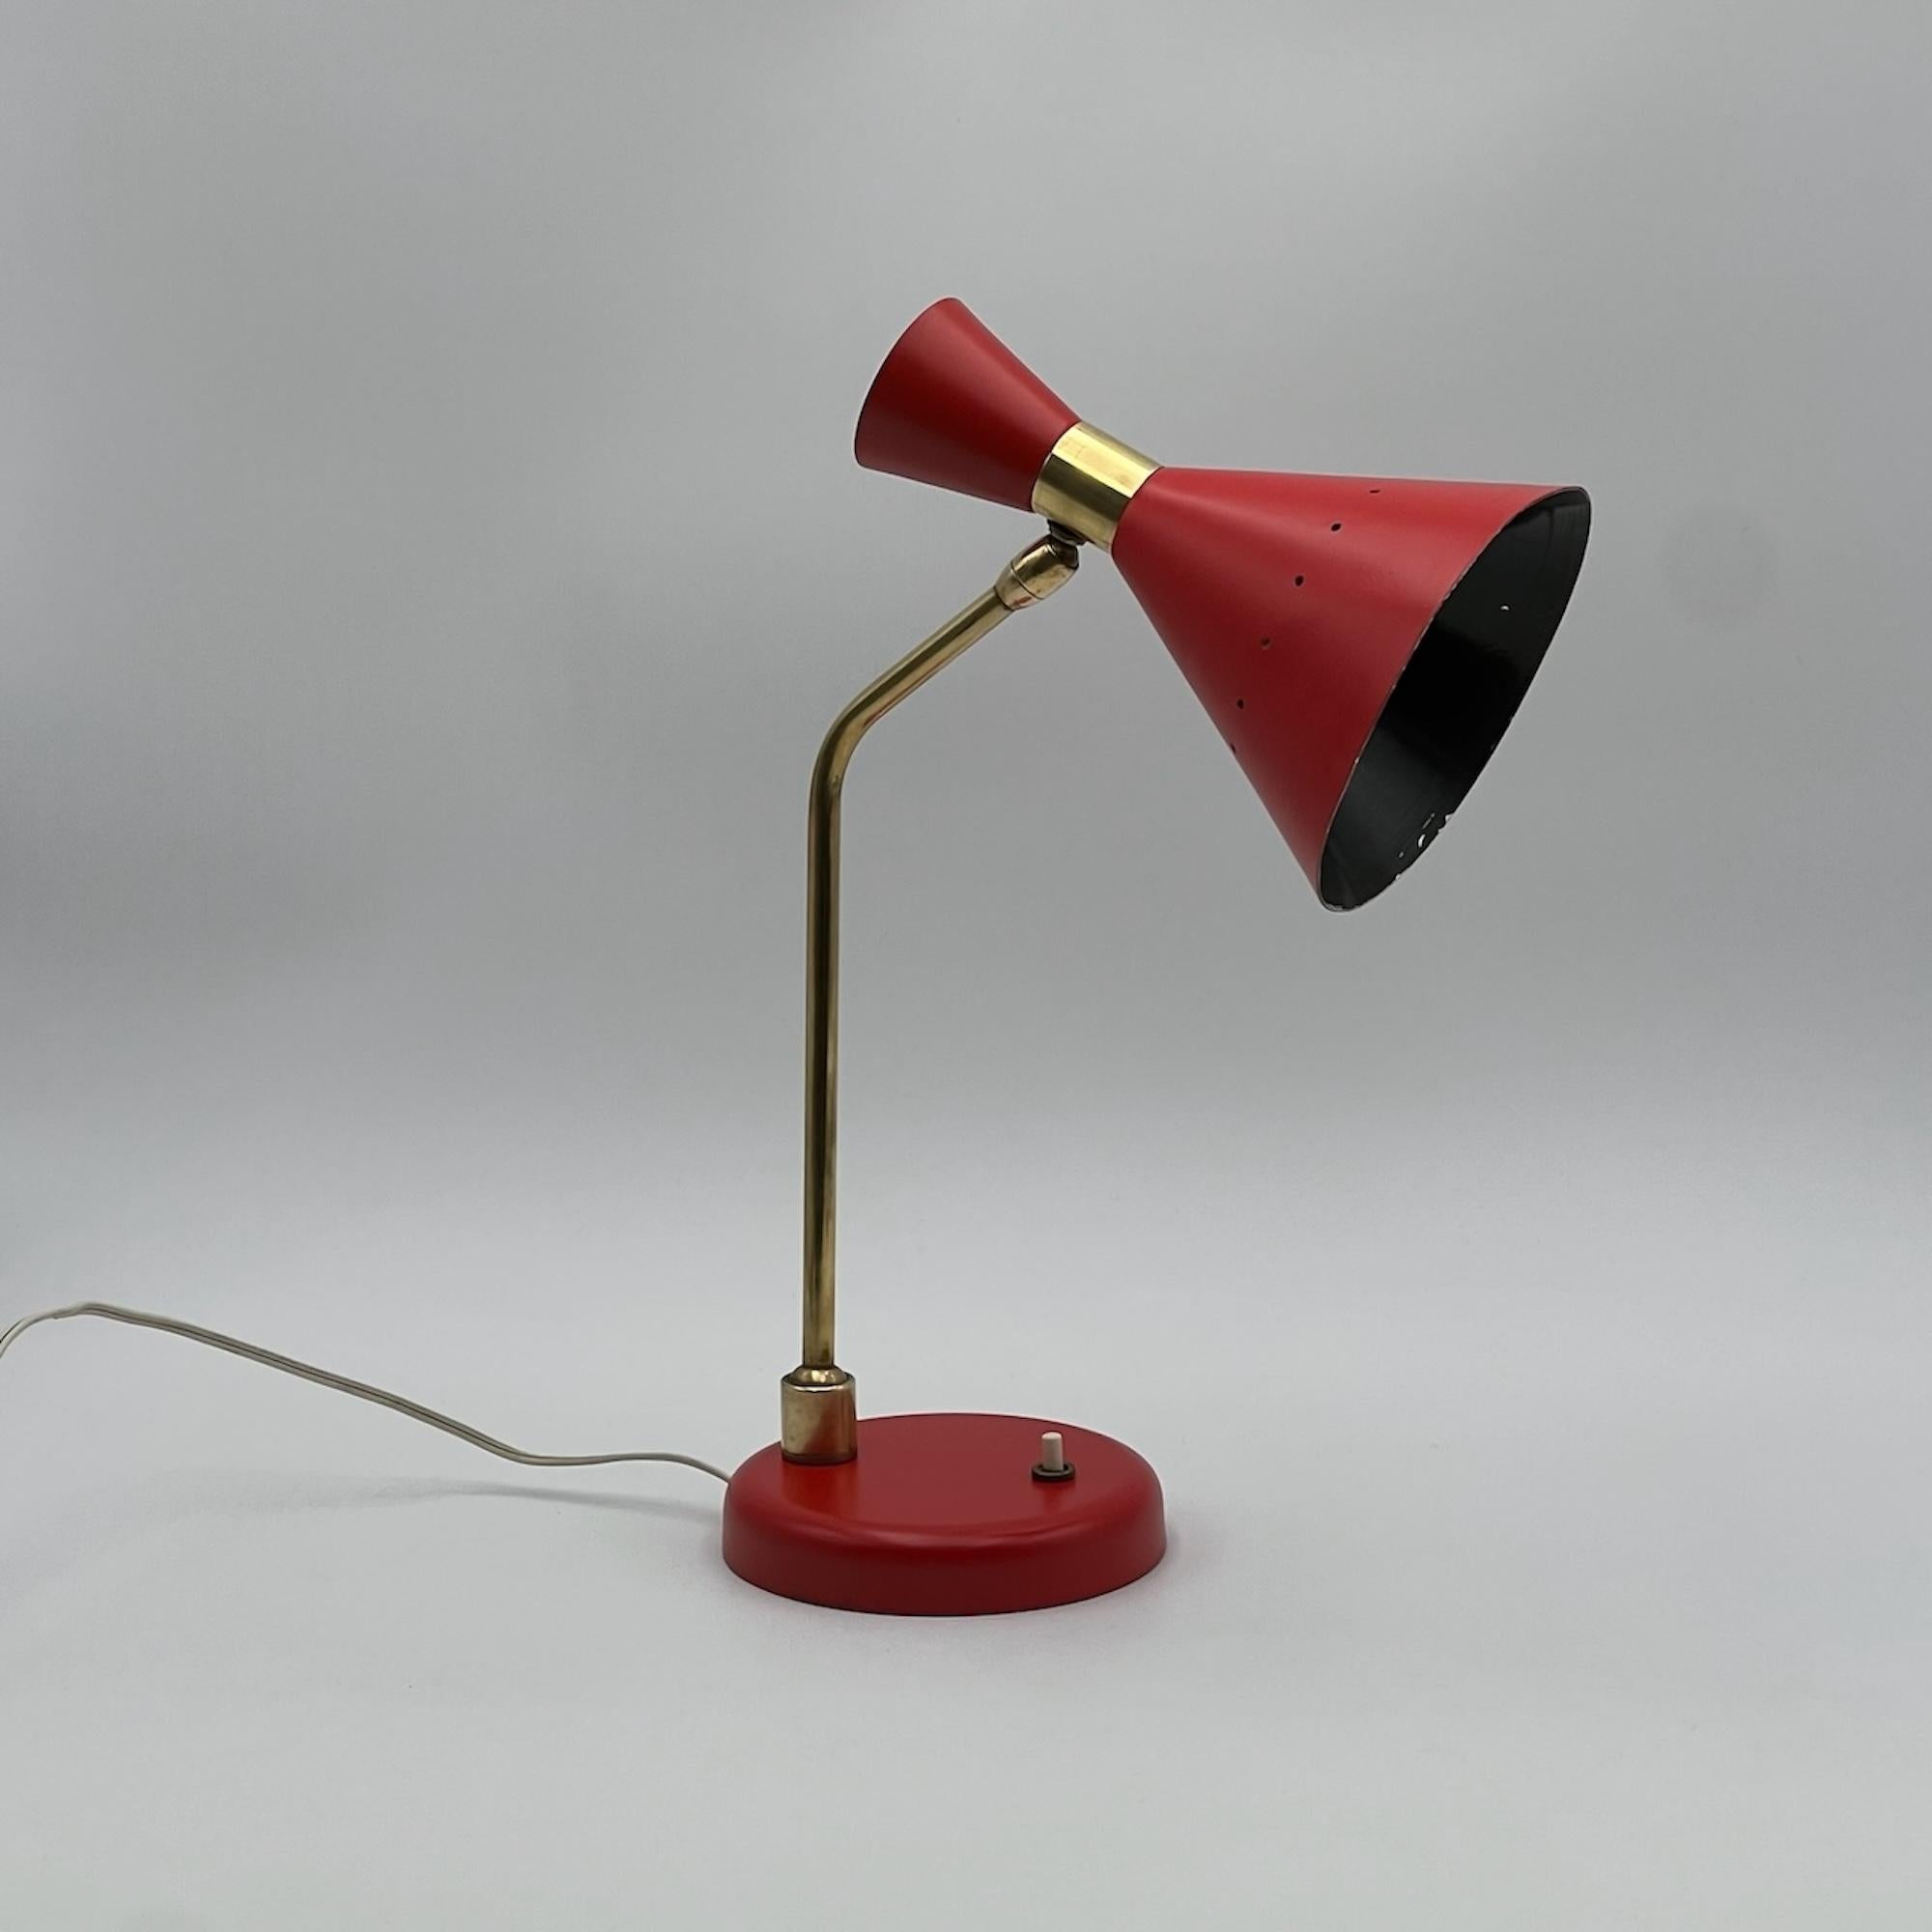 Lovely vintage lamp with a distinctive double cone shape, an adjustable brass stem and lacquered red metal lampshade and base, attributable to the iconic maker Stilnovo, Italy.

The lampshade has an peculiar shape that resembles a megaphone. The